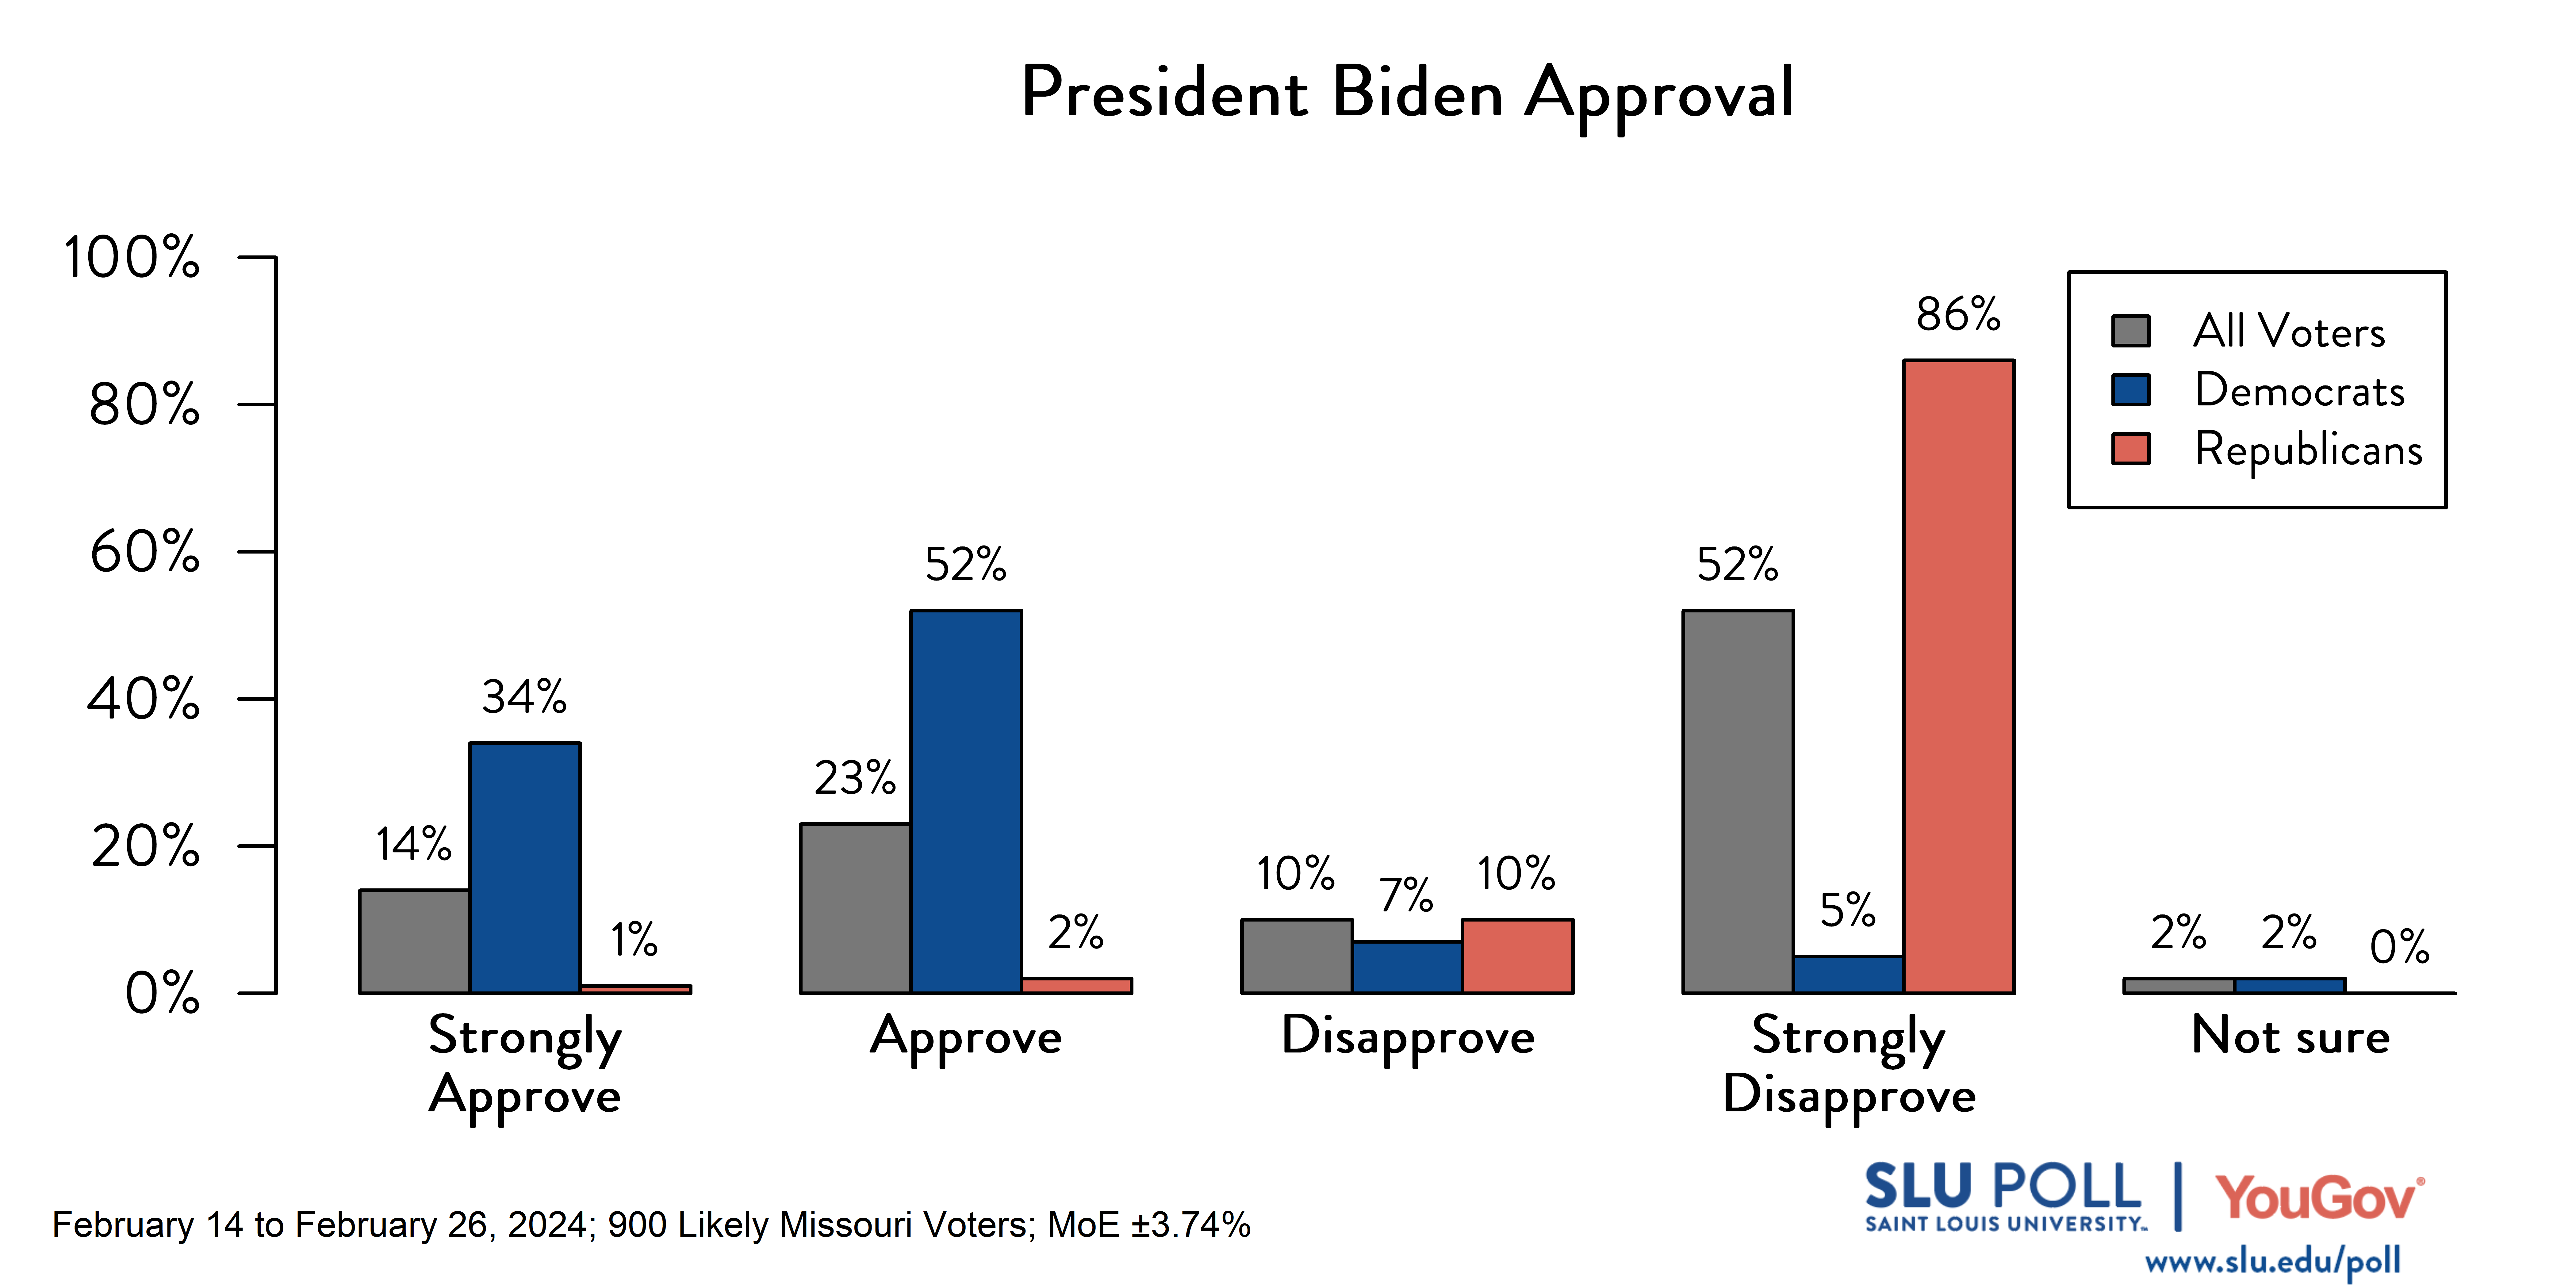 Likely voters' responses to 'Do you approve or disapprove of the way each is doing their job…President Joe Biden?': 14% Strongly approve, 23% Approve, 10% Disapprove, 52% Strongly disapprove, and 2% Not sure. Democratic voters' responses: ' 34% Strongly approve, 52% Approve, 7% Disapprove, 5% Strongly disapprove, and 2% Not sure. Republican voters' responses:  1% Strongly approve, 2% Approve, 10% Disapprove, 86% Strongly disapprove, and 0% Not sure.